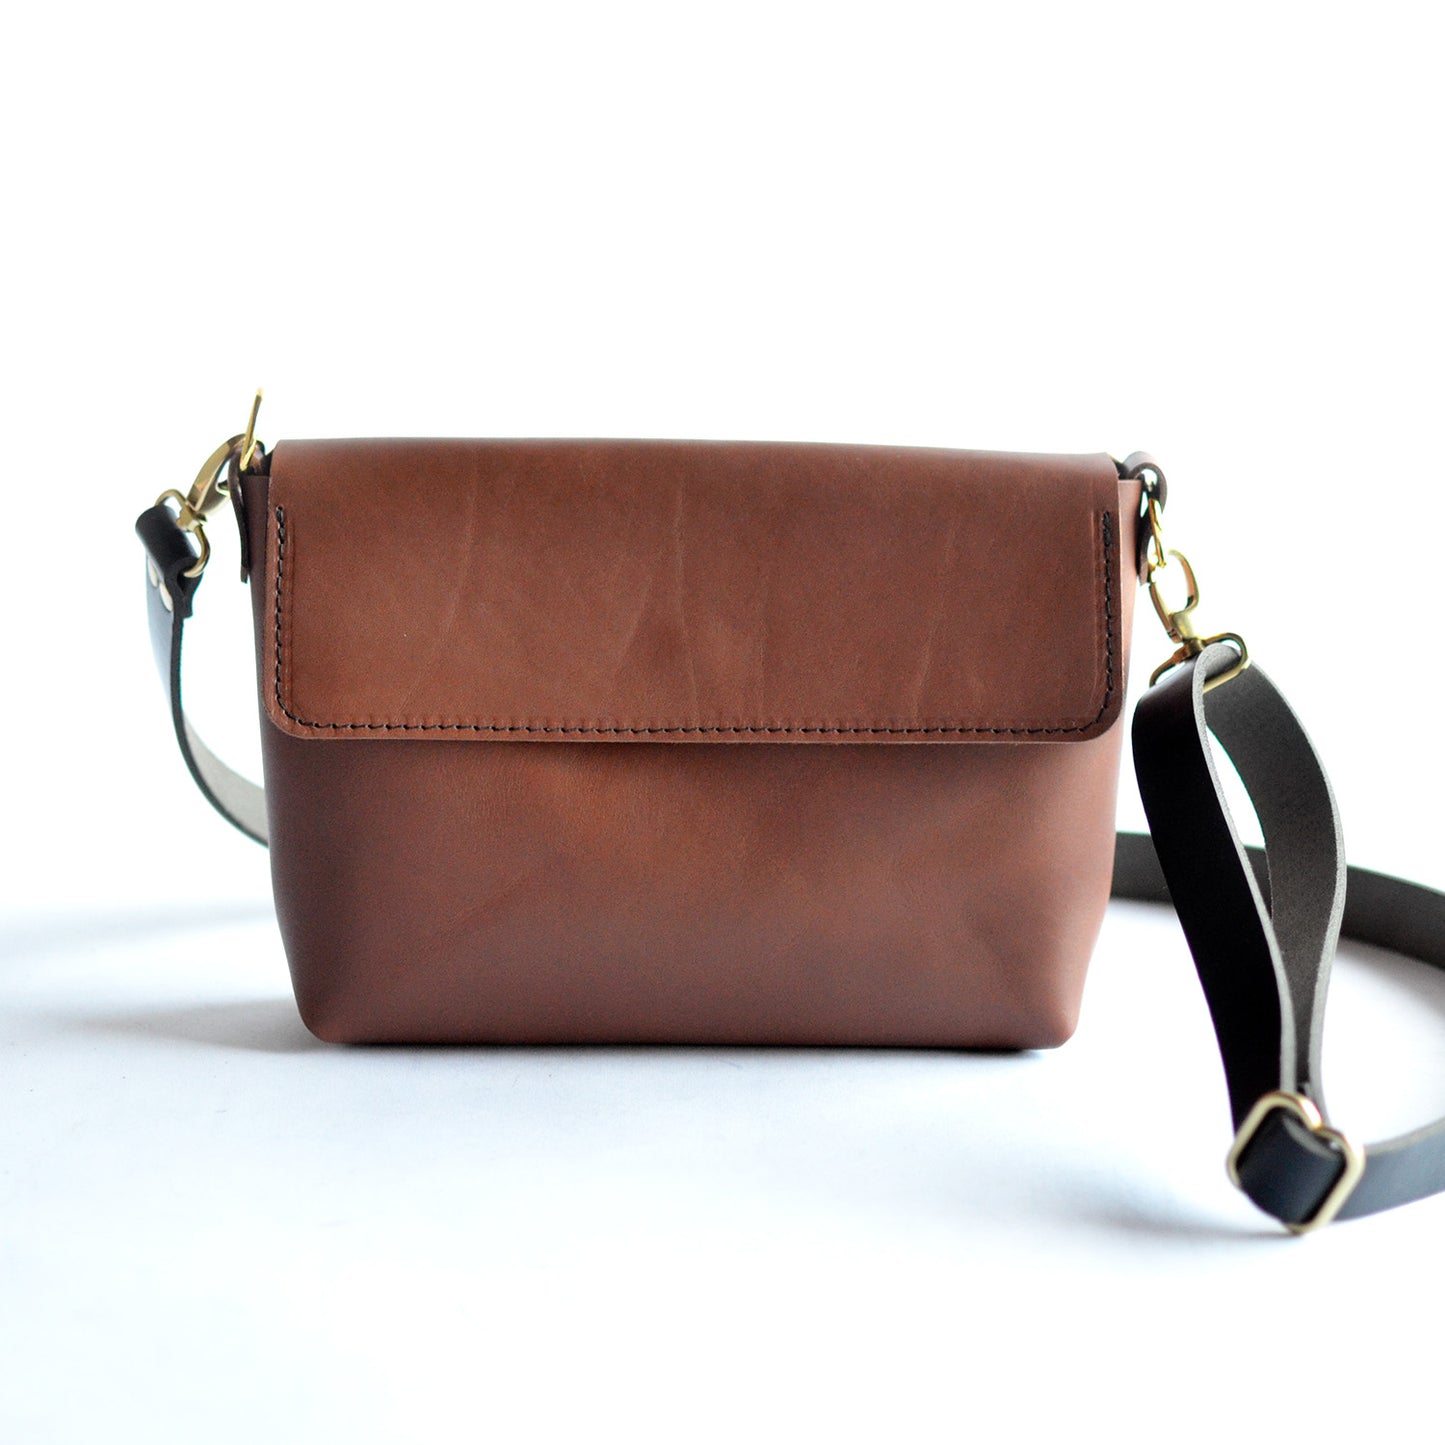 HARLOW Crossbody Clutch - Brown Leather